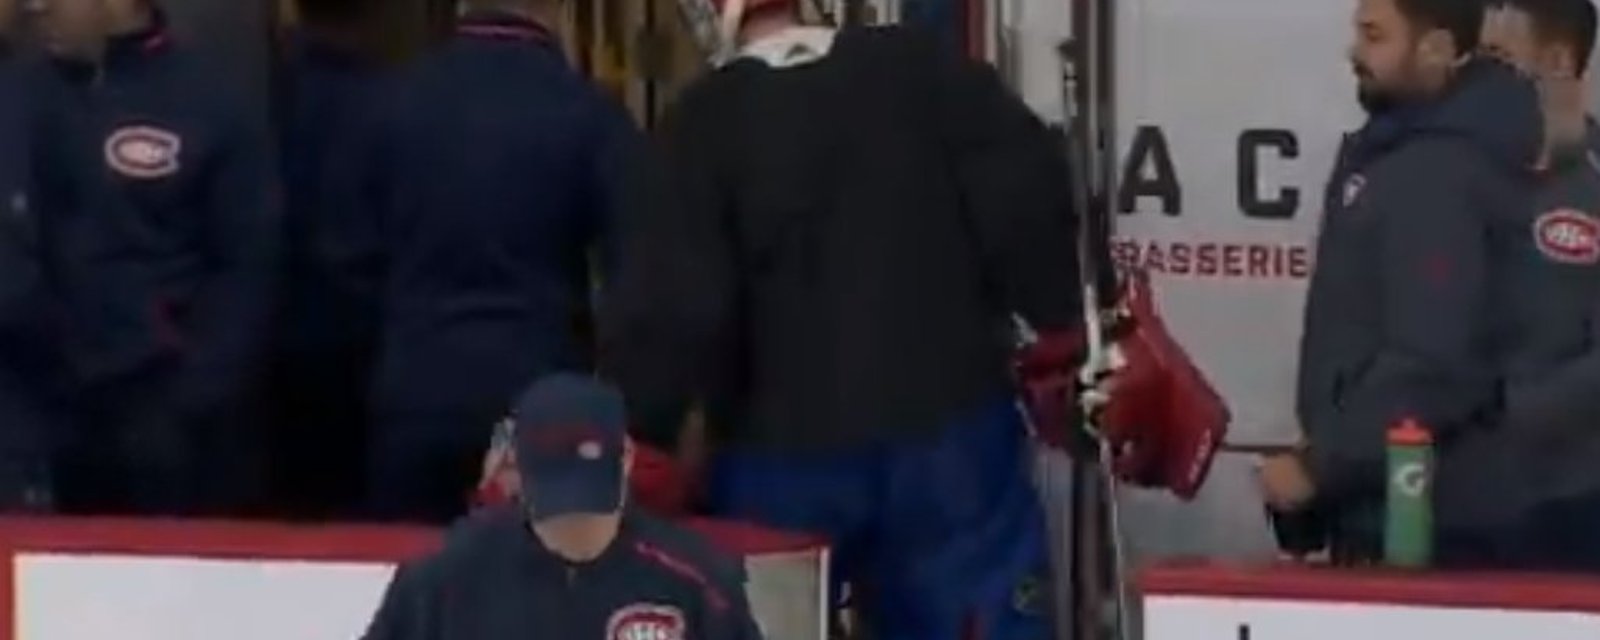 Breaking: After stunning return, Price mysteriously leaves Habs practice early! 